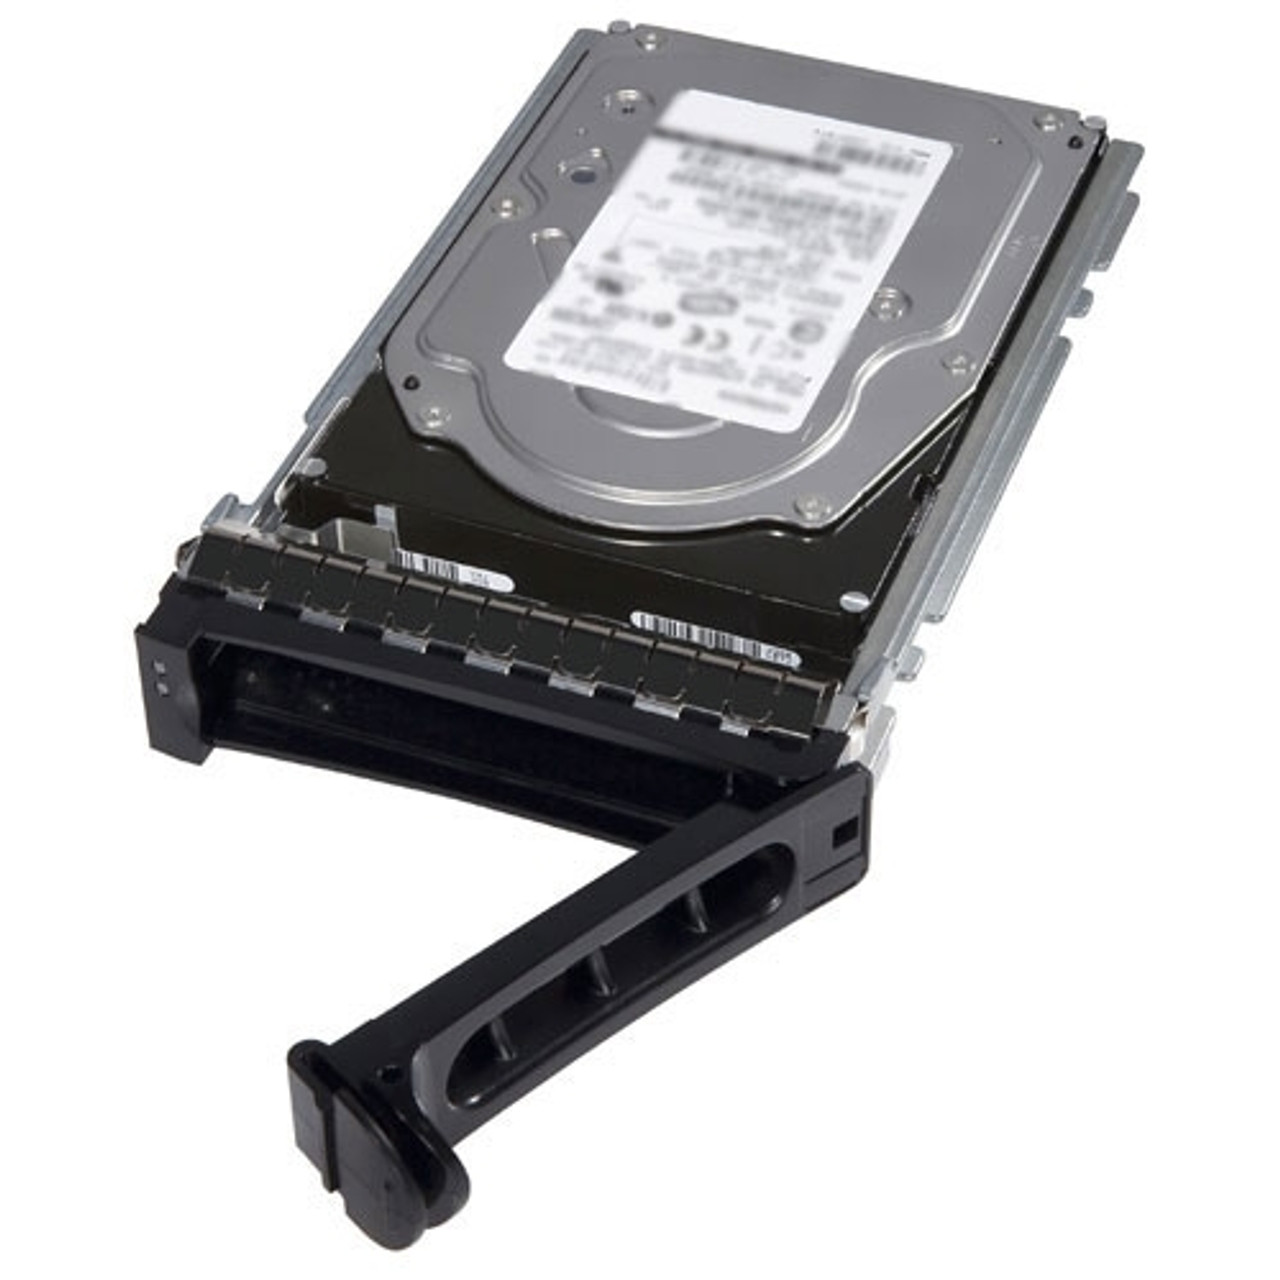 DELL NX822 1tb 7200rpm Sata-ii 3.5inch Low Profile(1.0inch) Hard Drive With Tray For Poweredge 11g R710 Rack Server